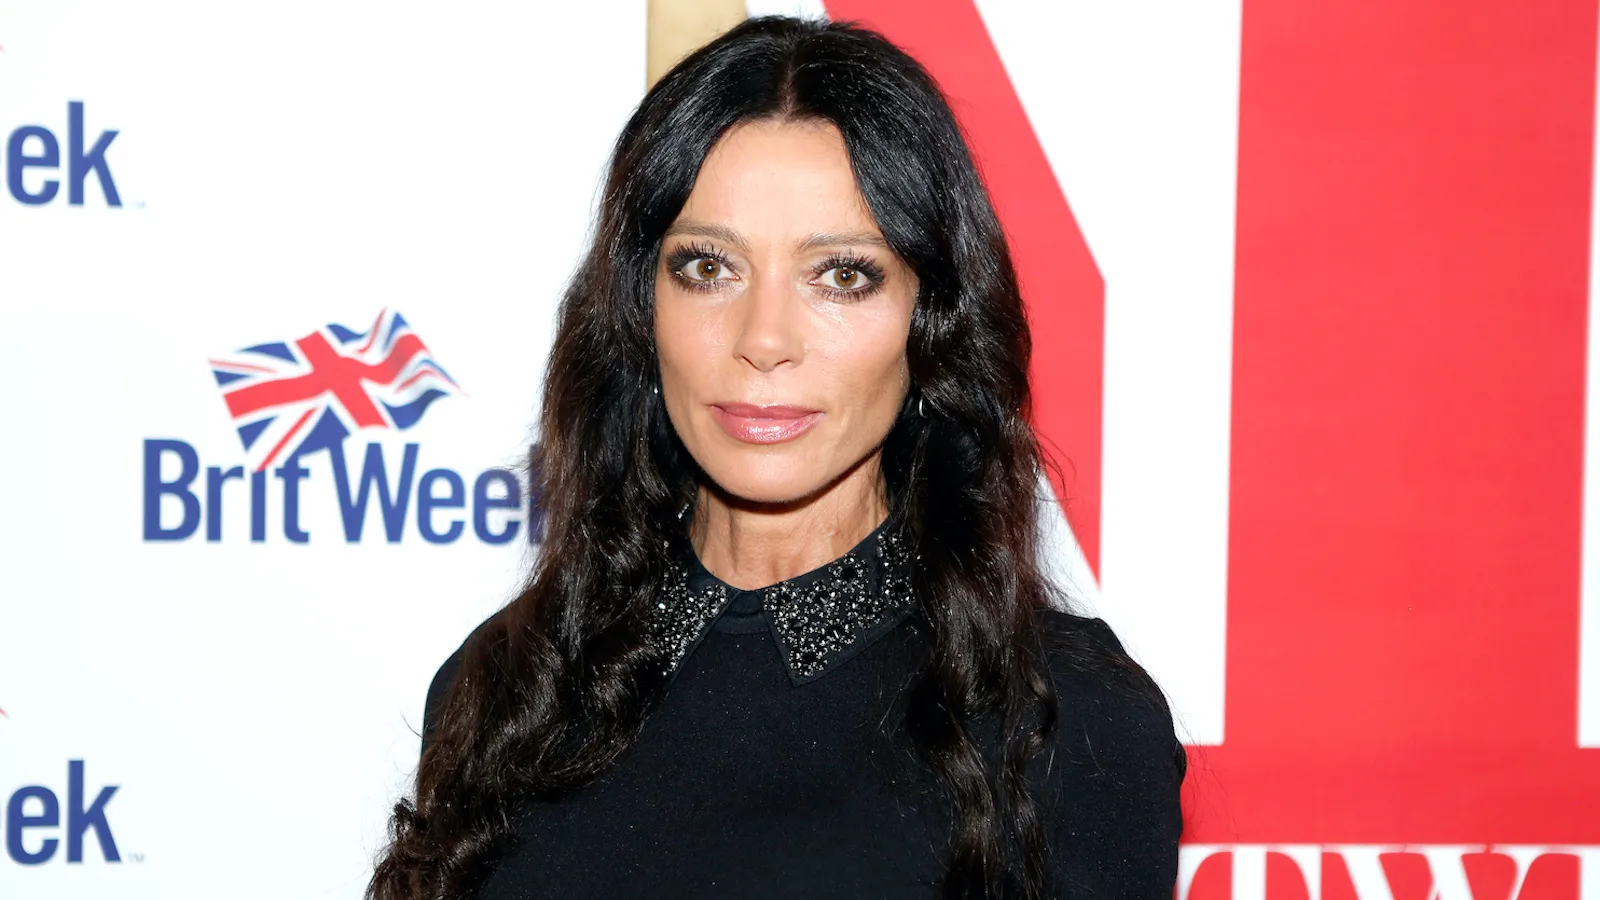 Carlton Gebbia - The Real Housewives of Beverly Hills